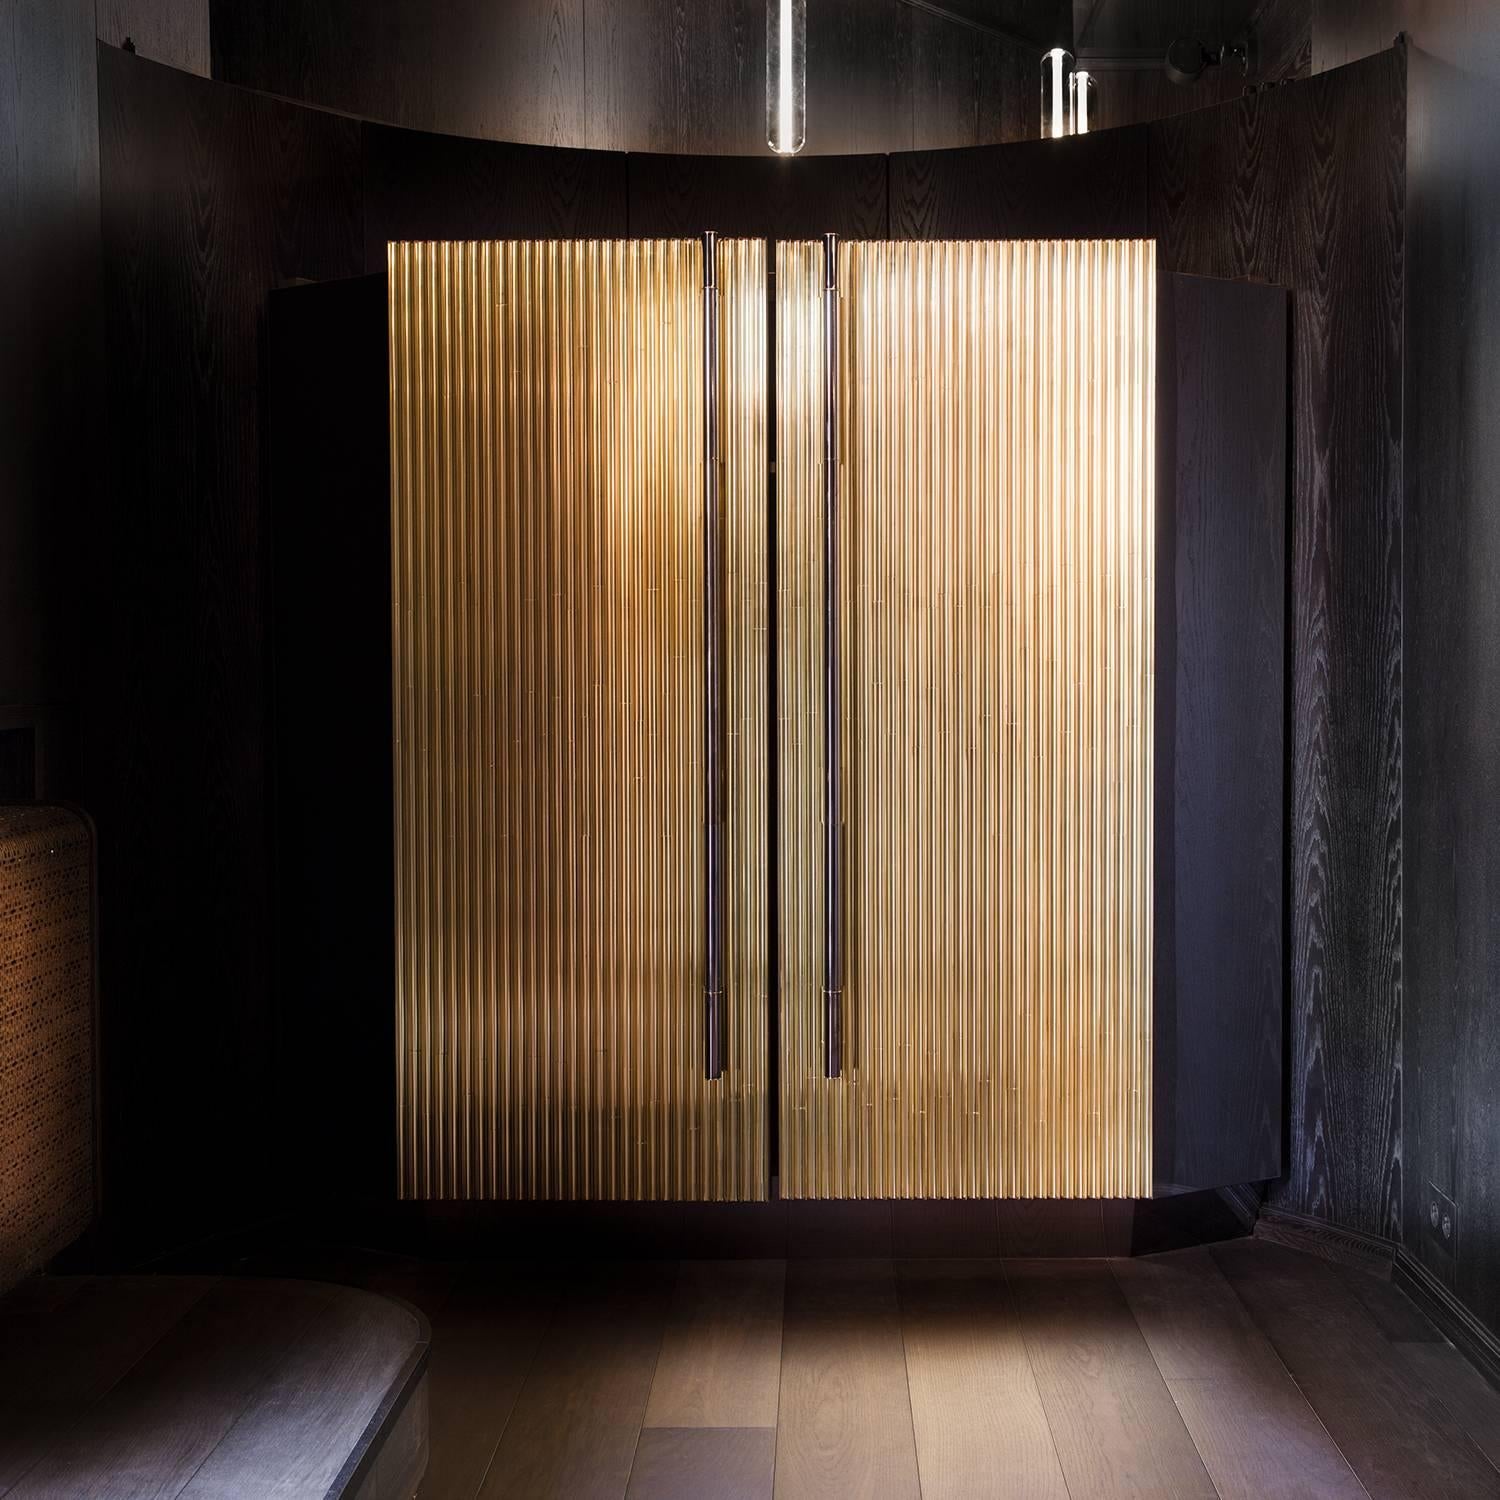 Trabo is a bespoke wooden cabinet with elaborately detailed brass doors created by Sors Privatiselectionem to meet your highest expectations of practicality and style.